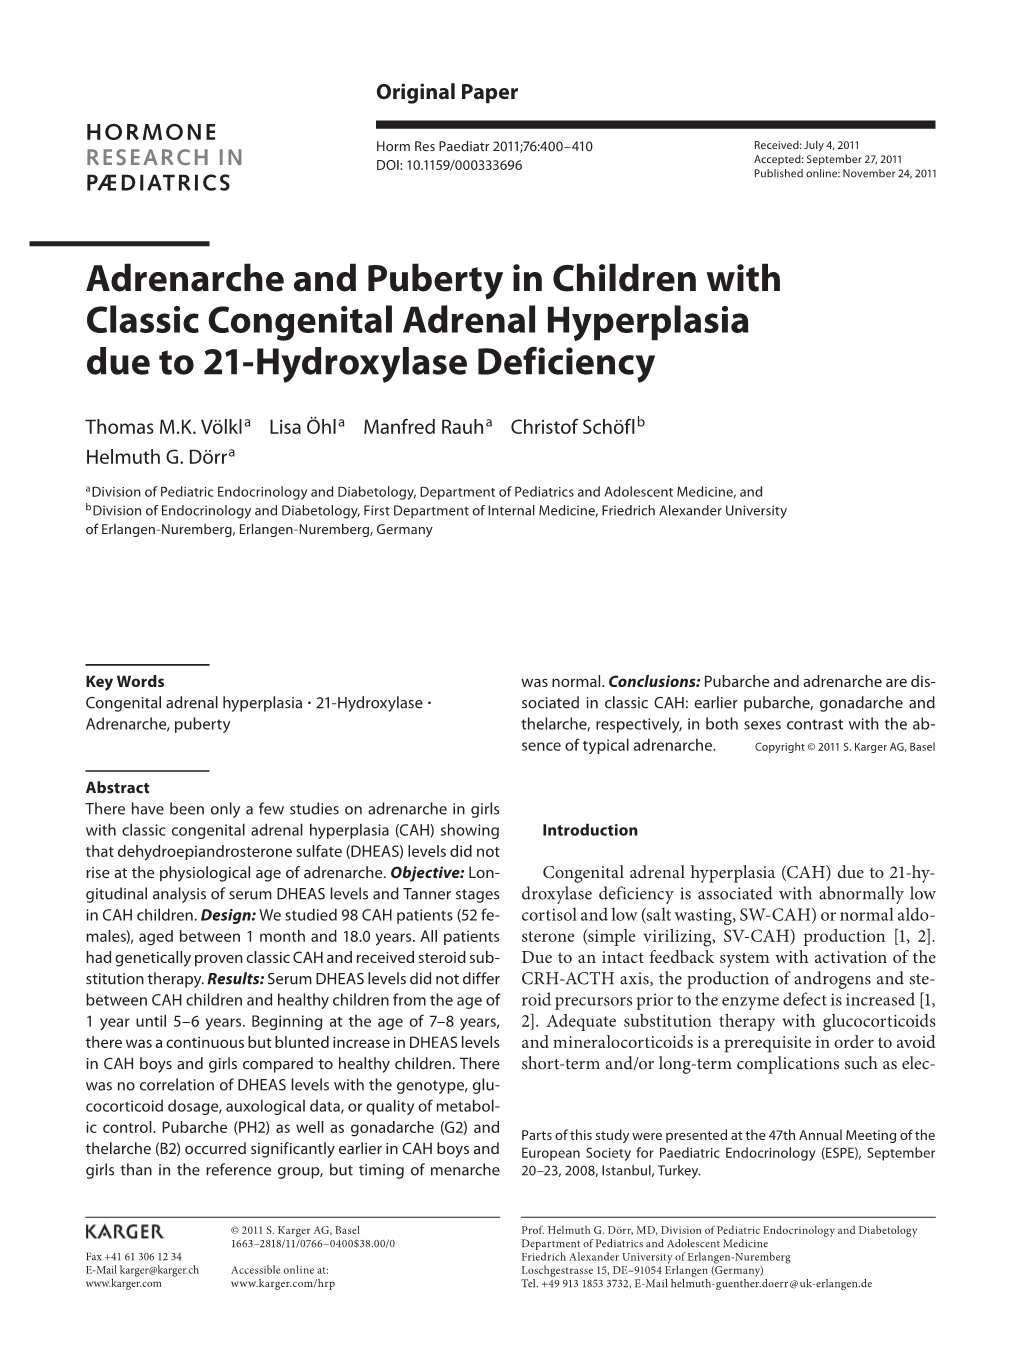 Adrenarche and Puberty in Children with Classic Congenital Adrenal Hyperplasia Due to 21-Hydroxylase Deficiency